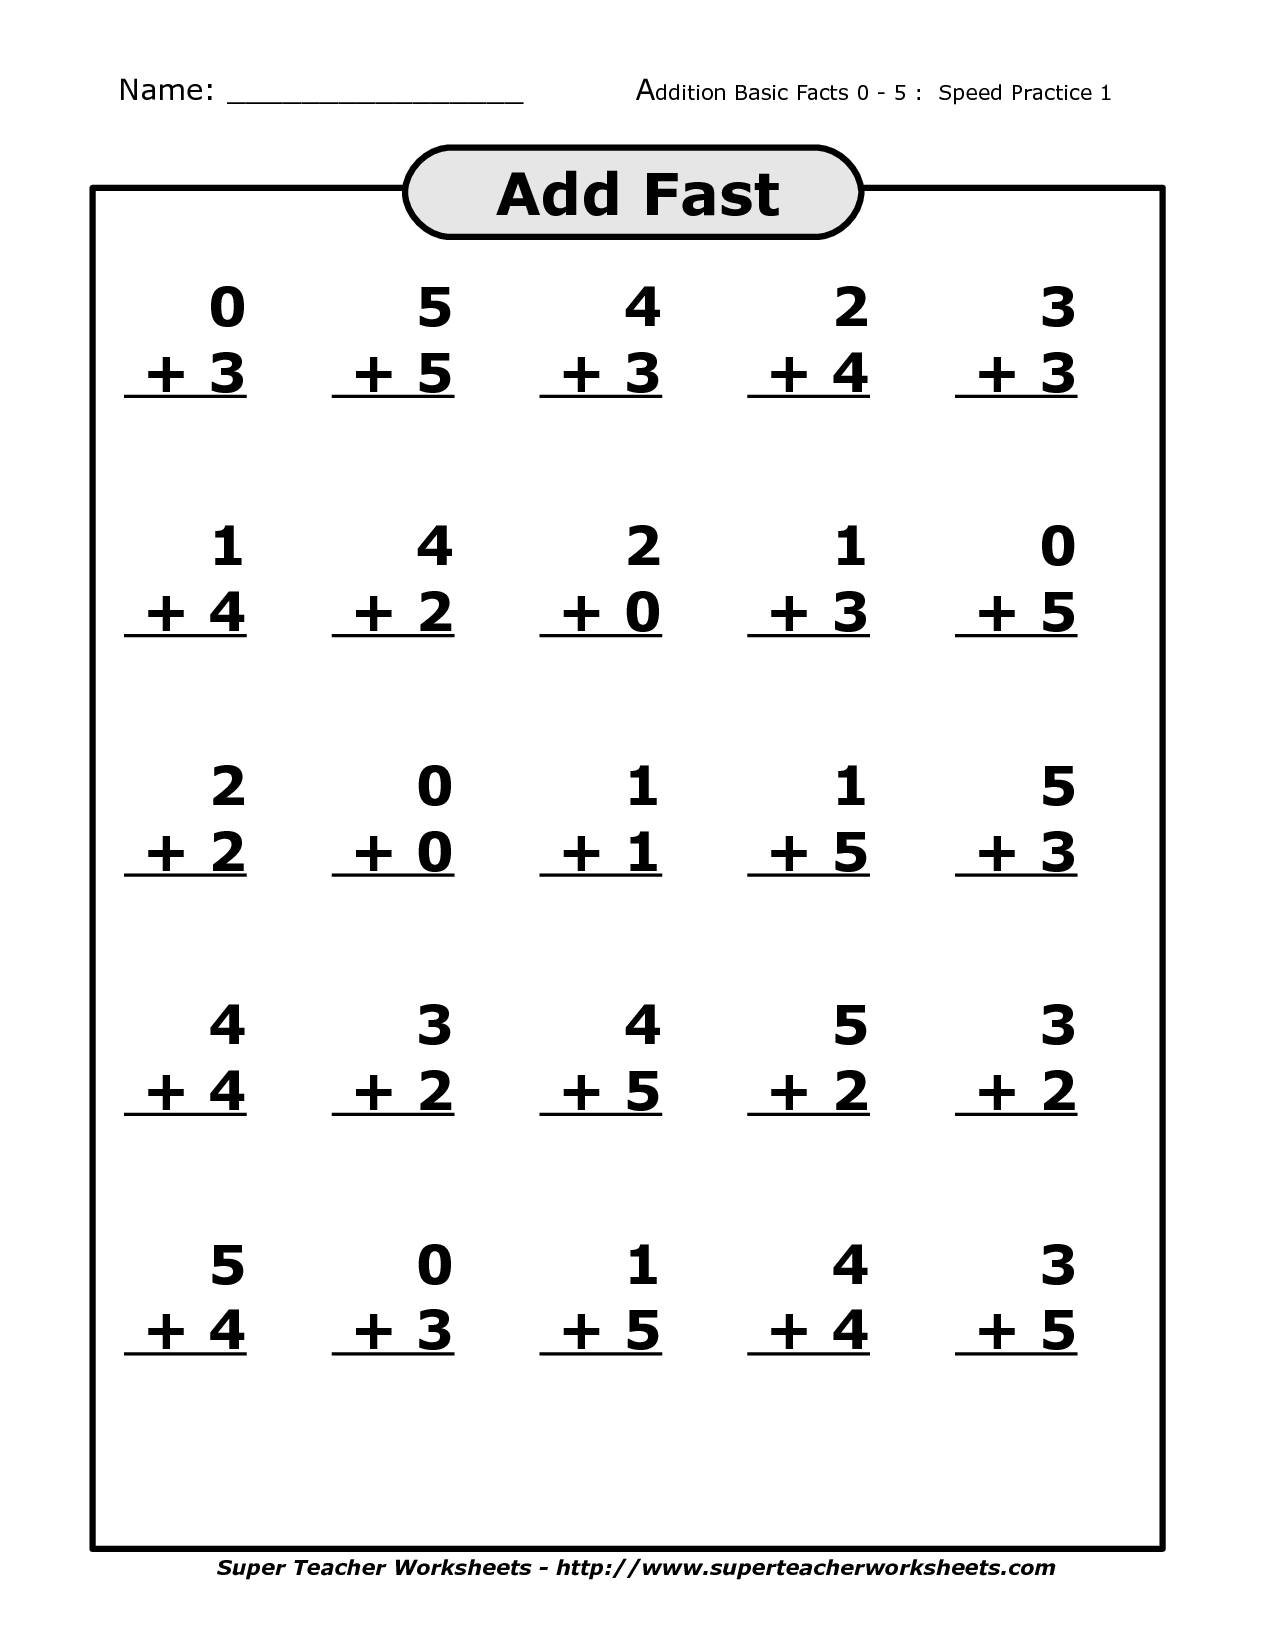 14 Best Images of Addition Facts Worksheets - First Grade ...